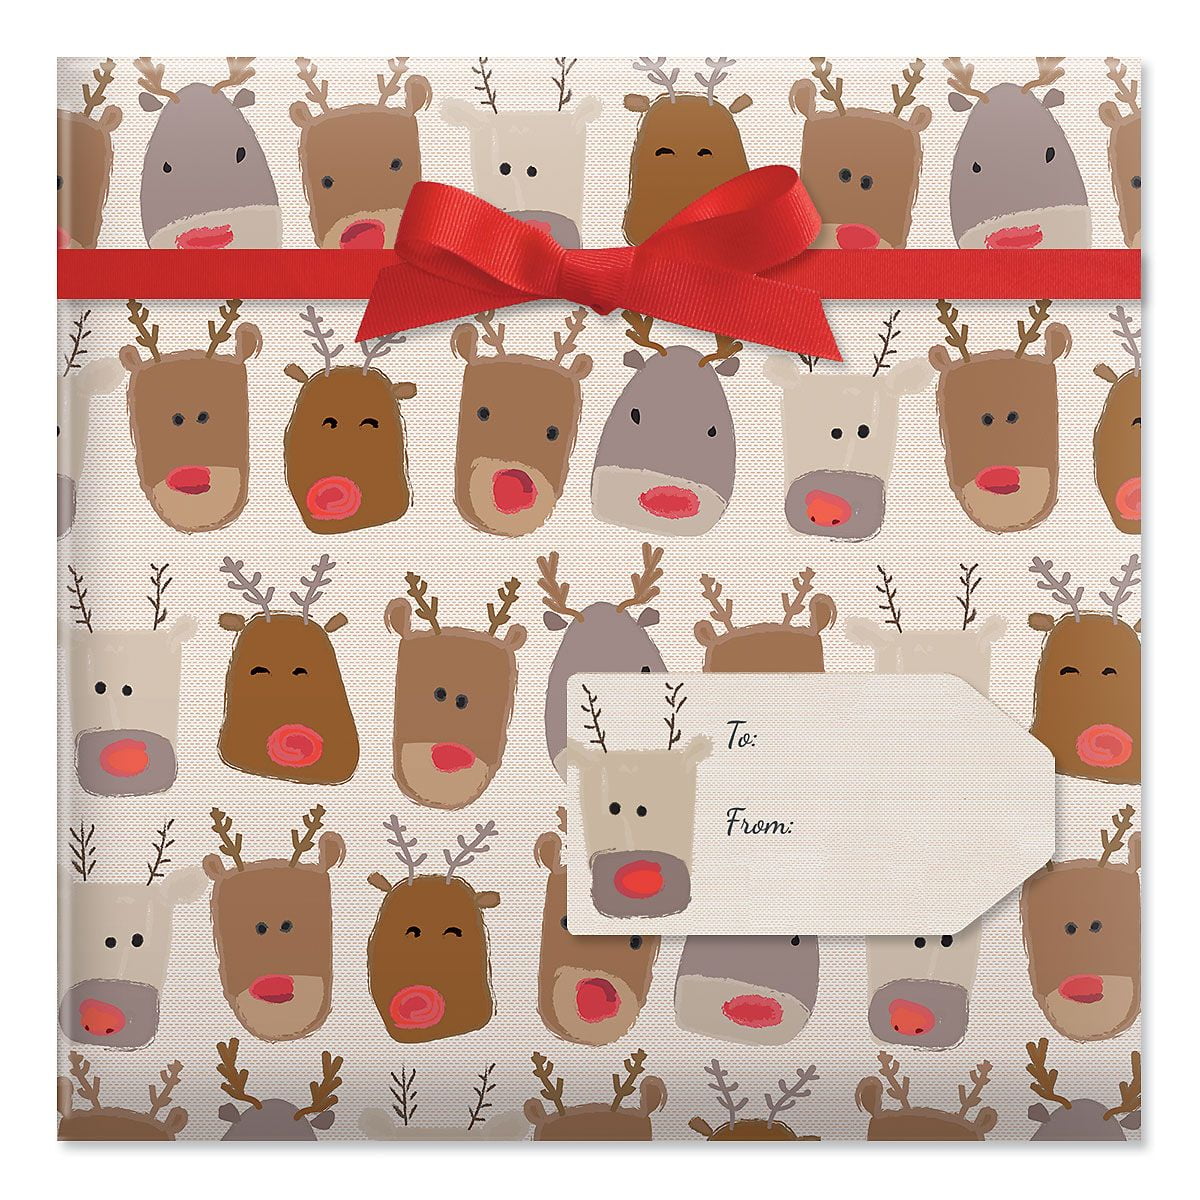 RUSPEPA Christmas Wrapping Paper, Jumbo Roll Kraft Paper - Black and White  Plaid Reindeer Design for Holiday Gift Wrap - 24 Inches x 100 Feet